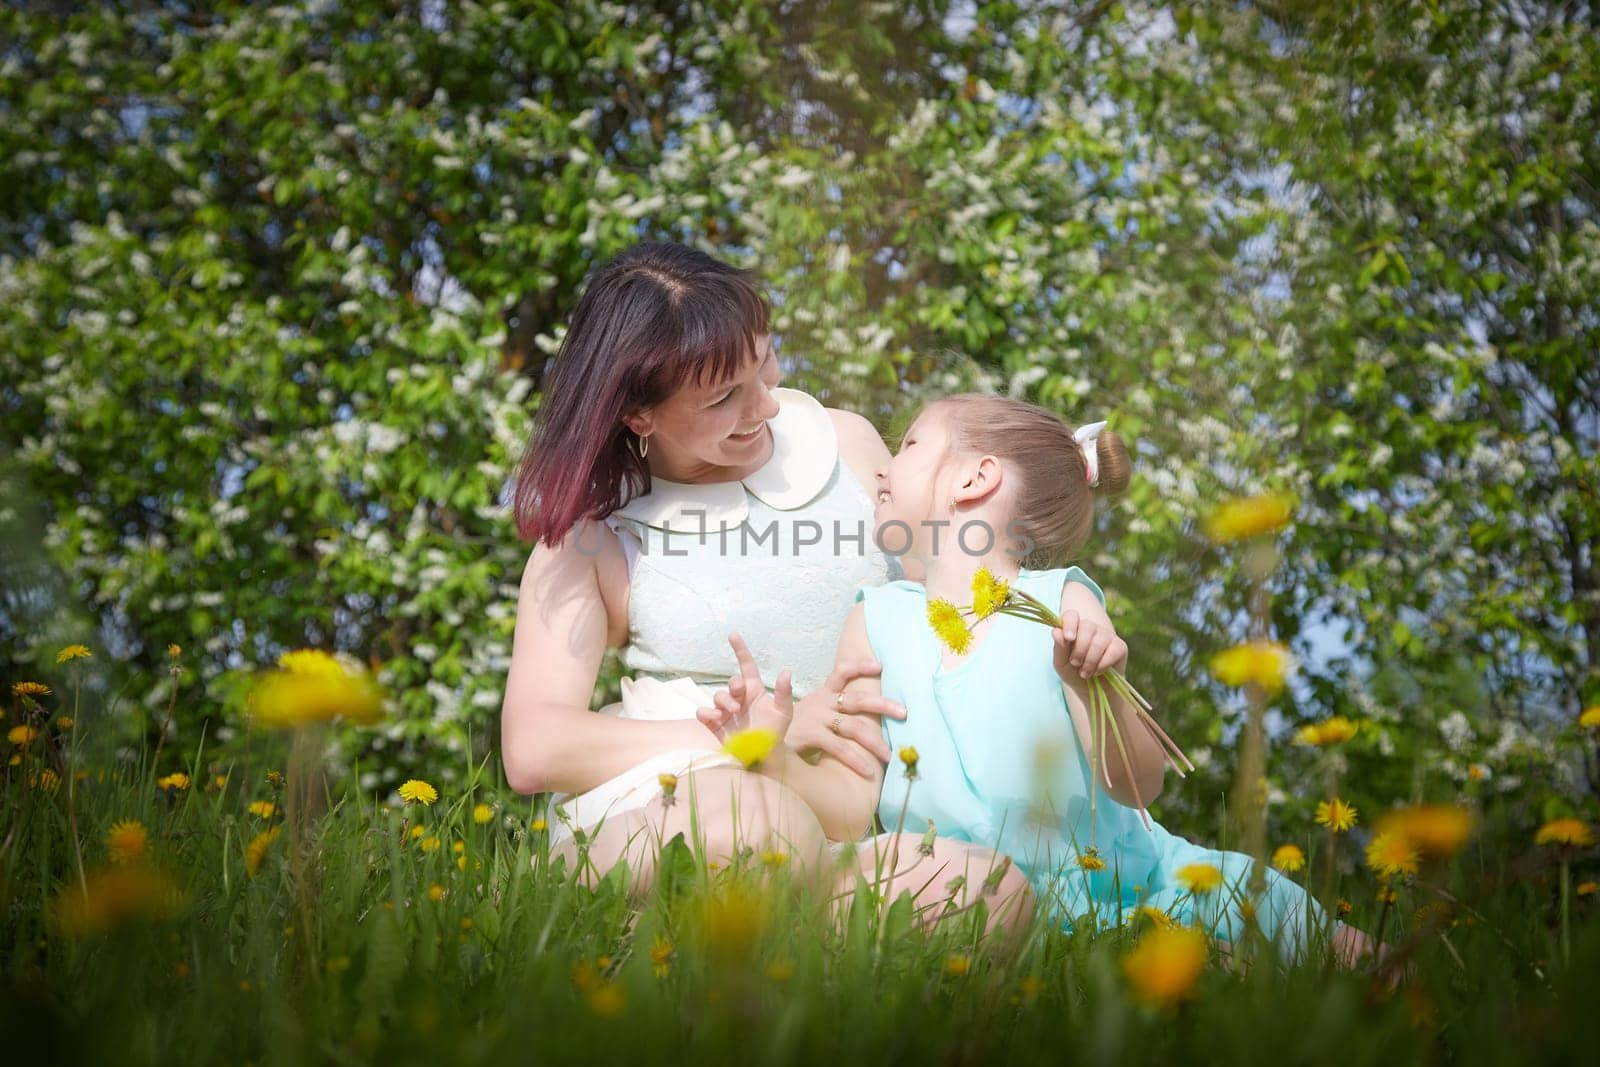 Happy mother and daughter enjoying rest, playing and fun on nature on a green lawn with dandelions and blooming apple tree on background. Woman and girl resting outdoors in summer and spring day